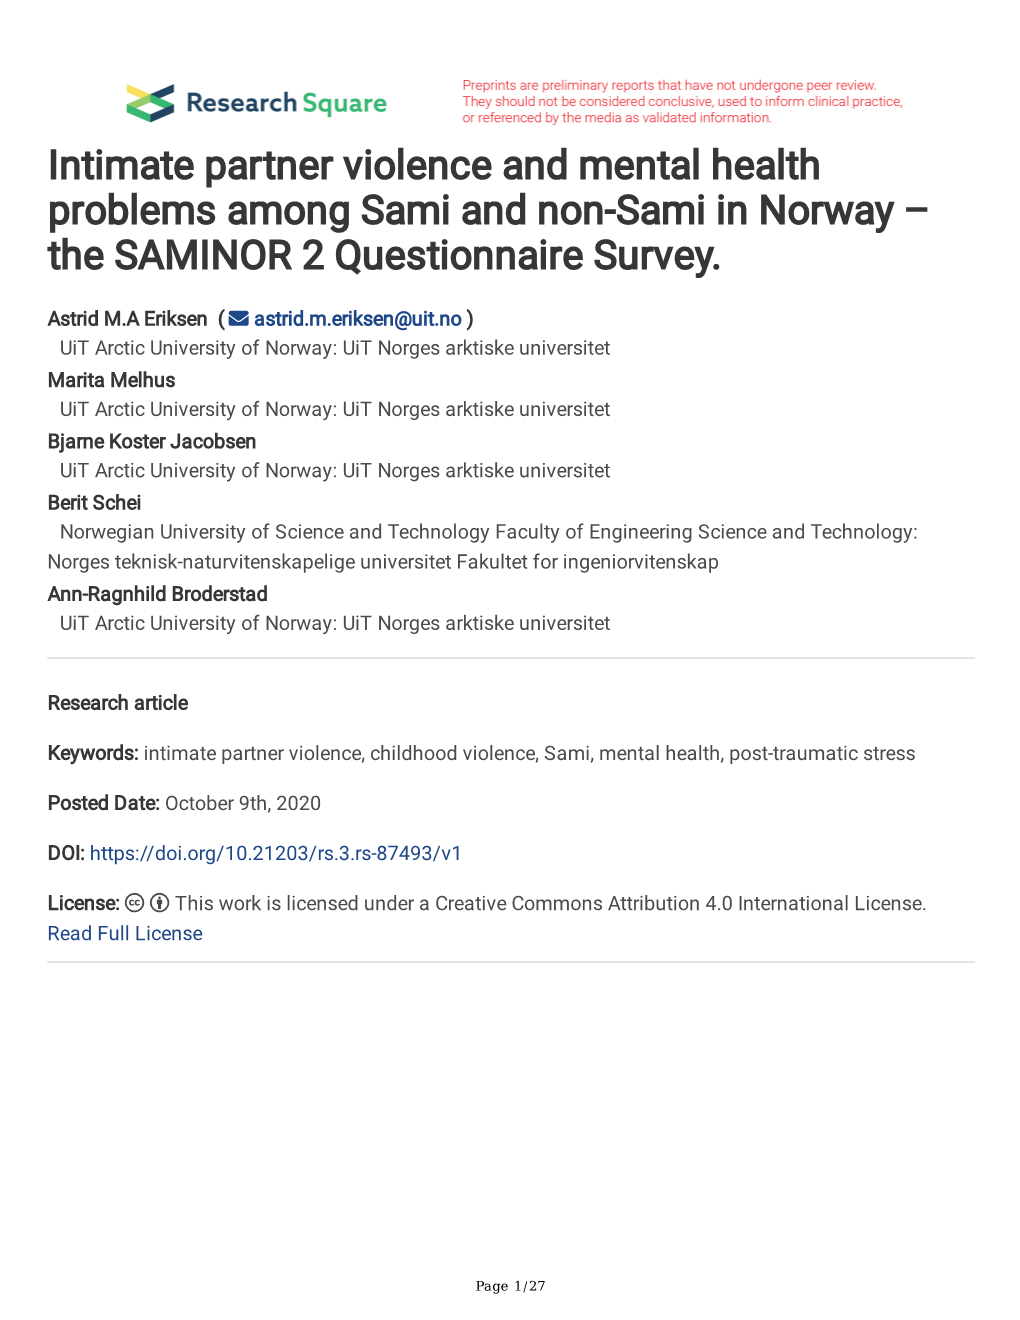 Intimate Partner Violence and Mental Health Problems Among Sami and Non-Sami in Norway – the SAMINOR 2 Questionnaire Survey